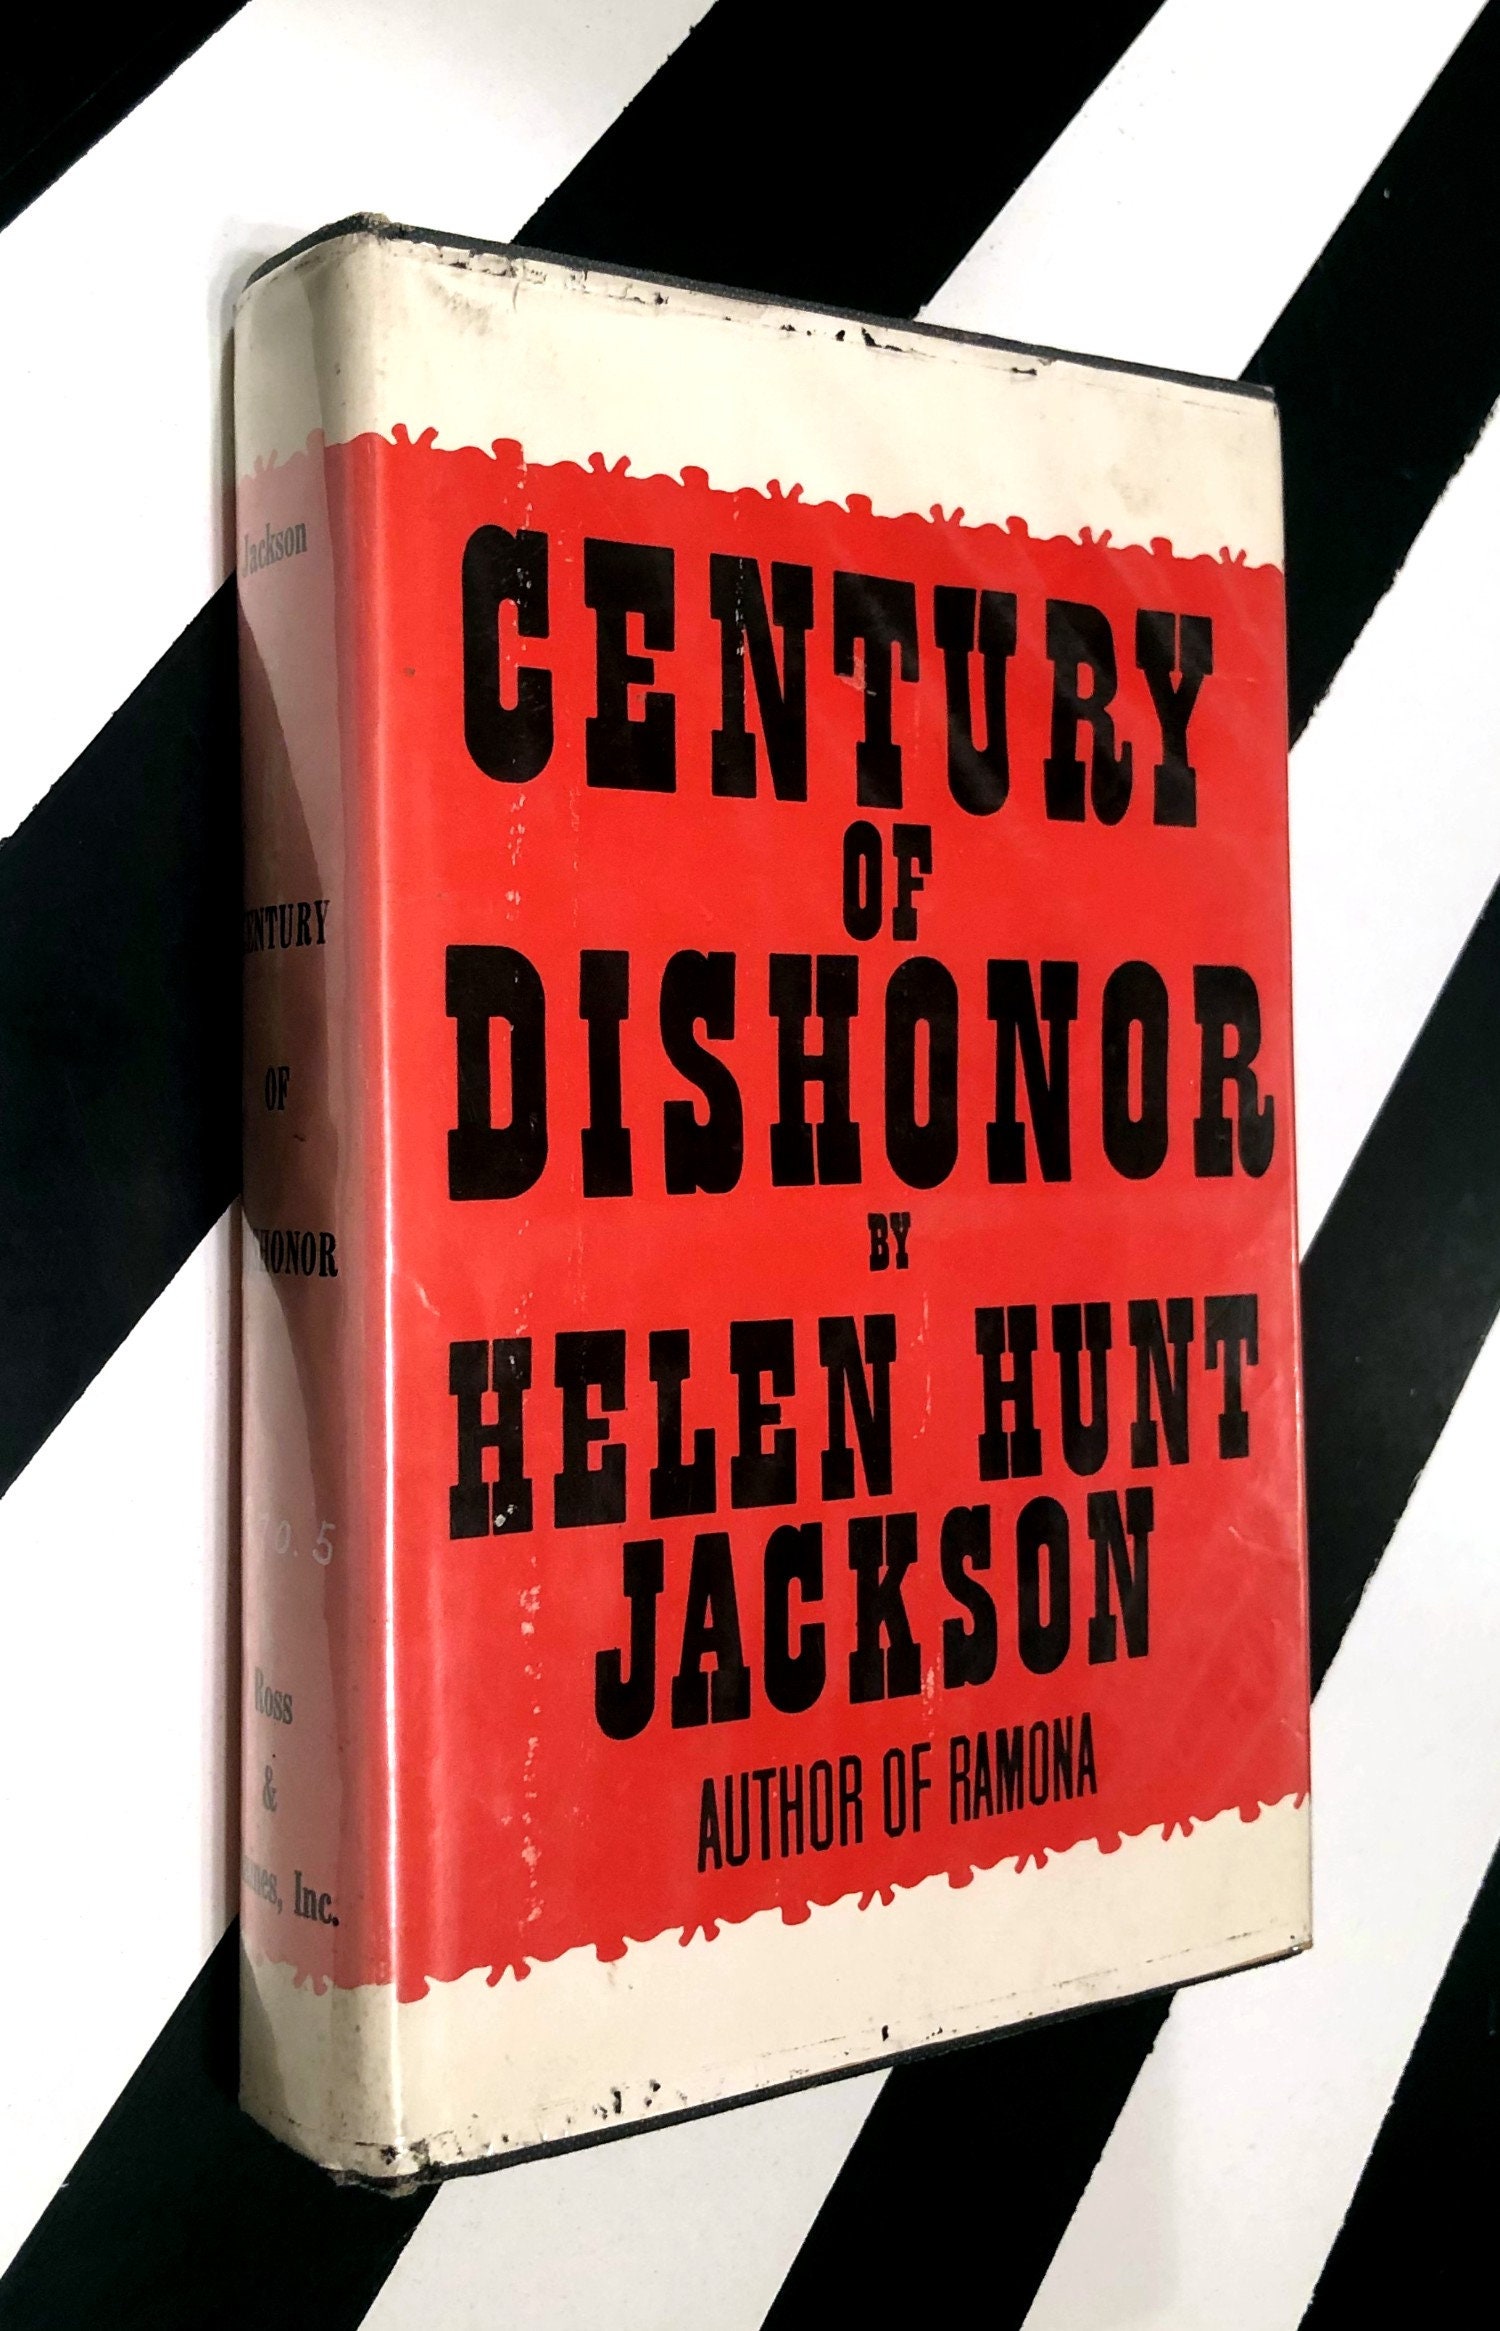 author of a century of dishonor